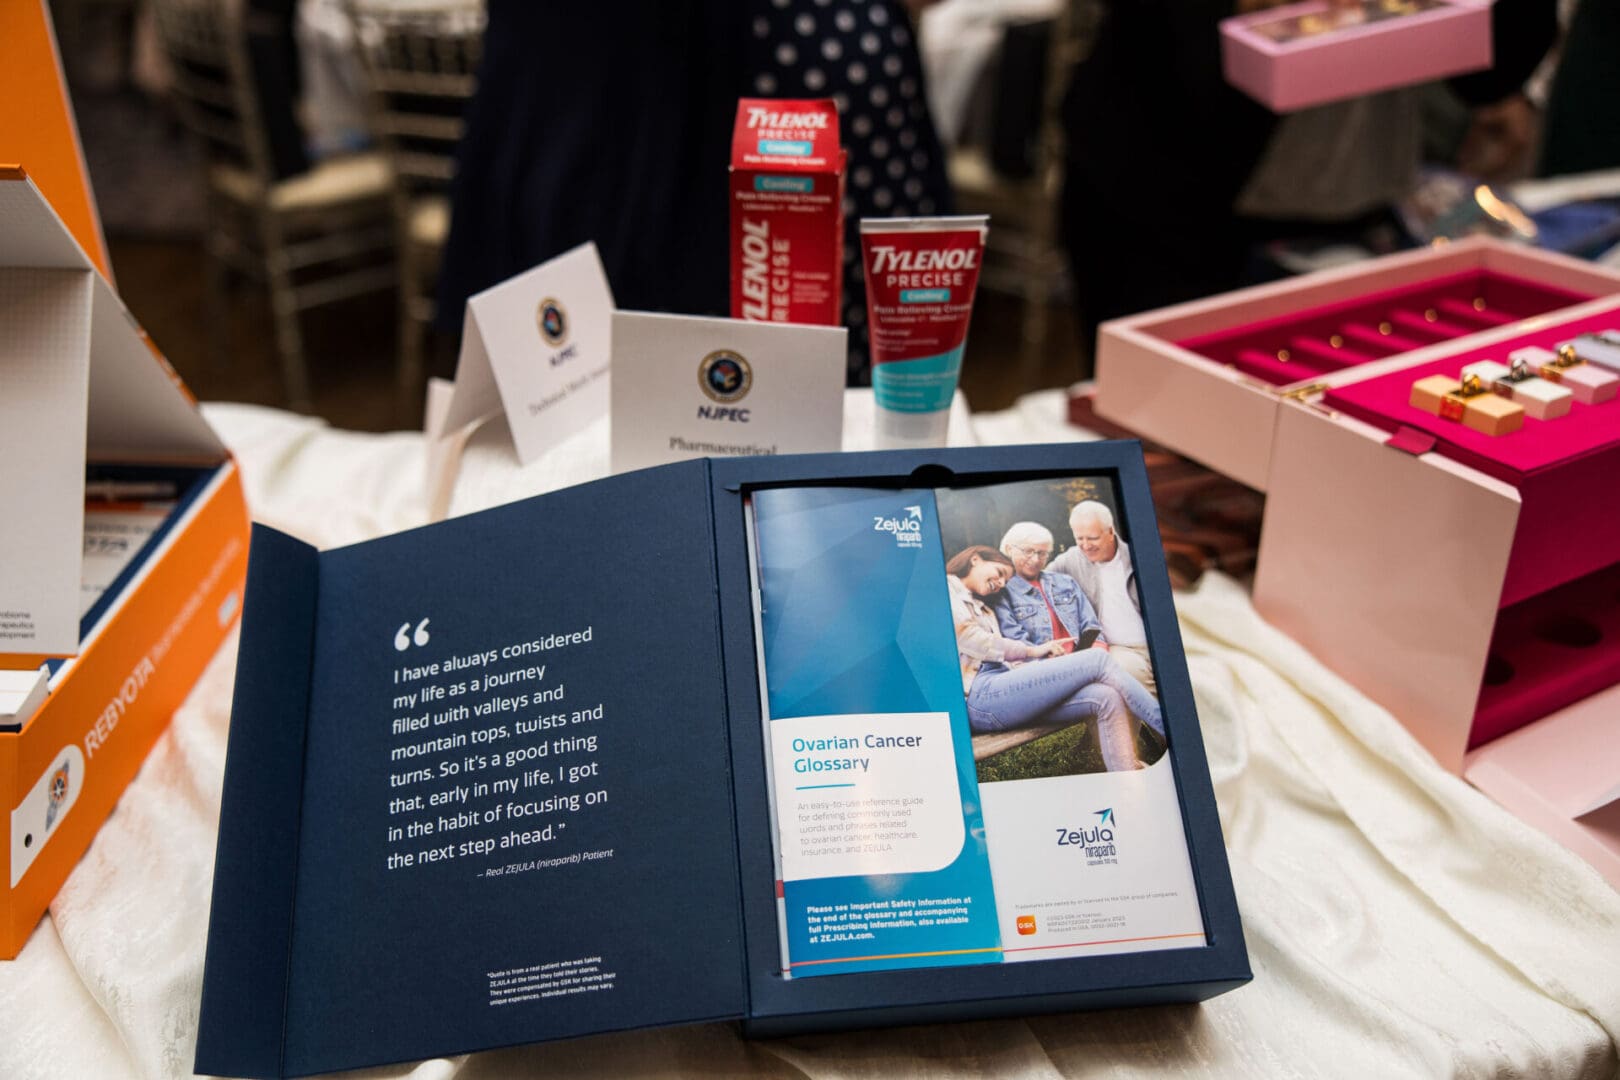 A box of products on a table at an event.